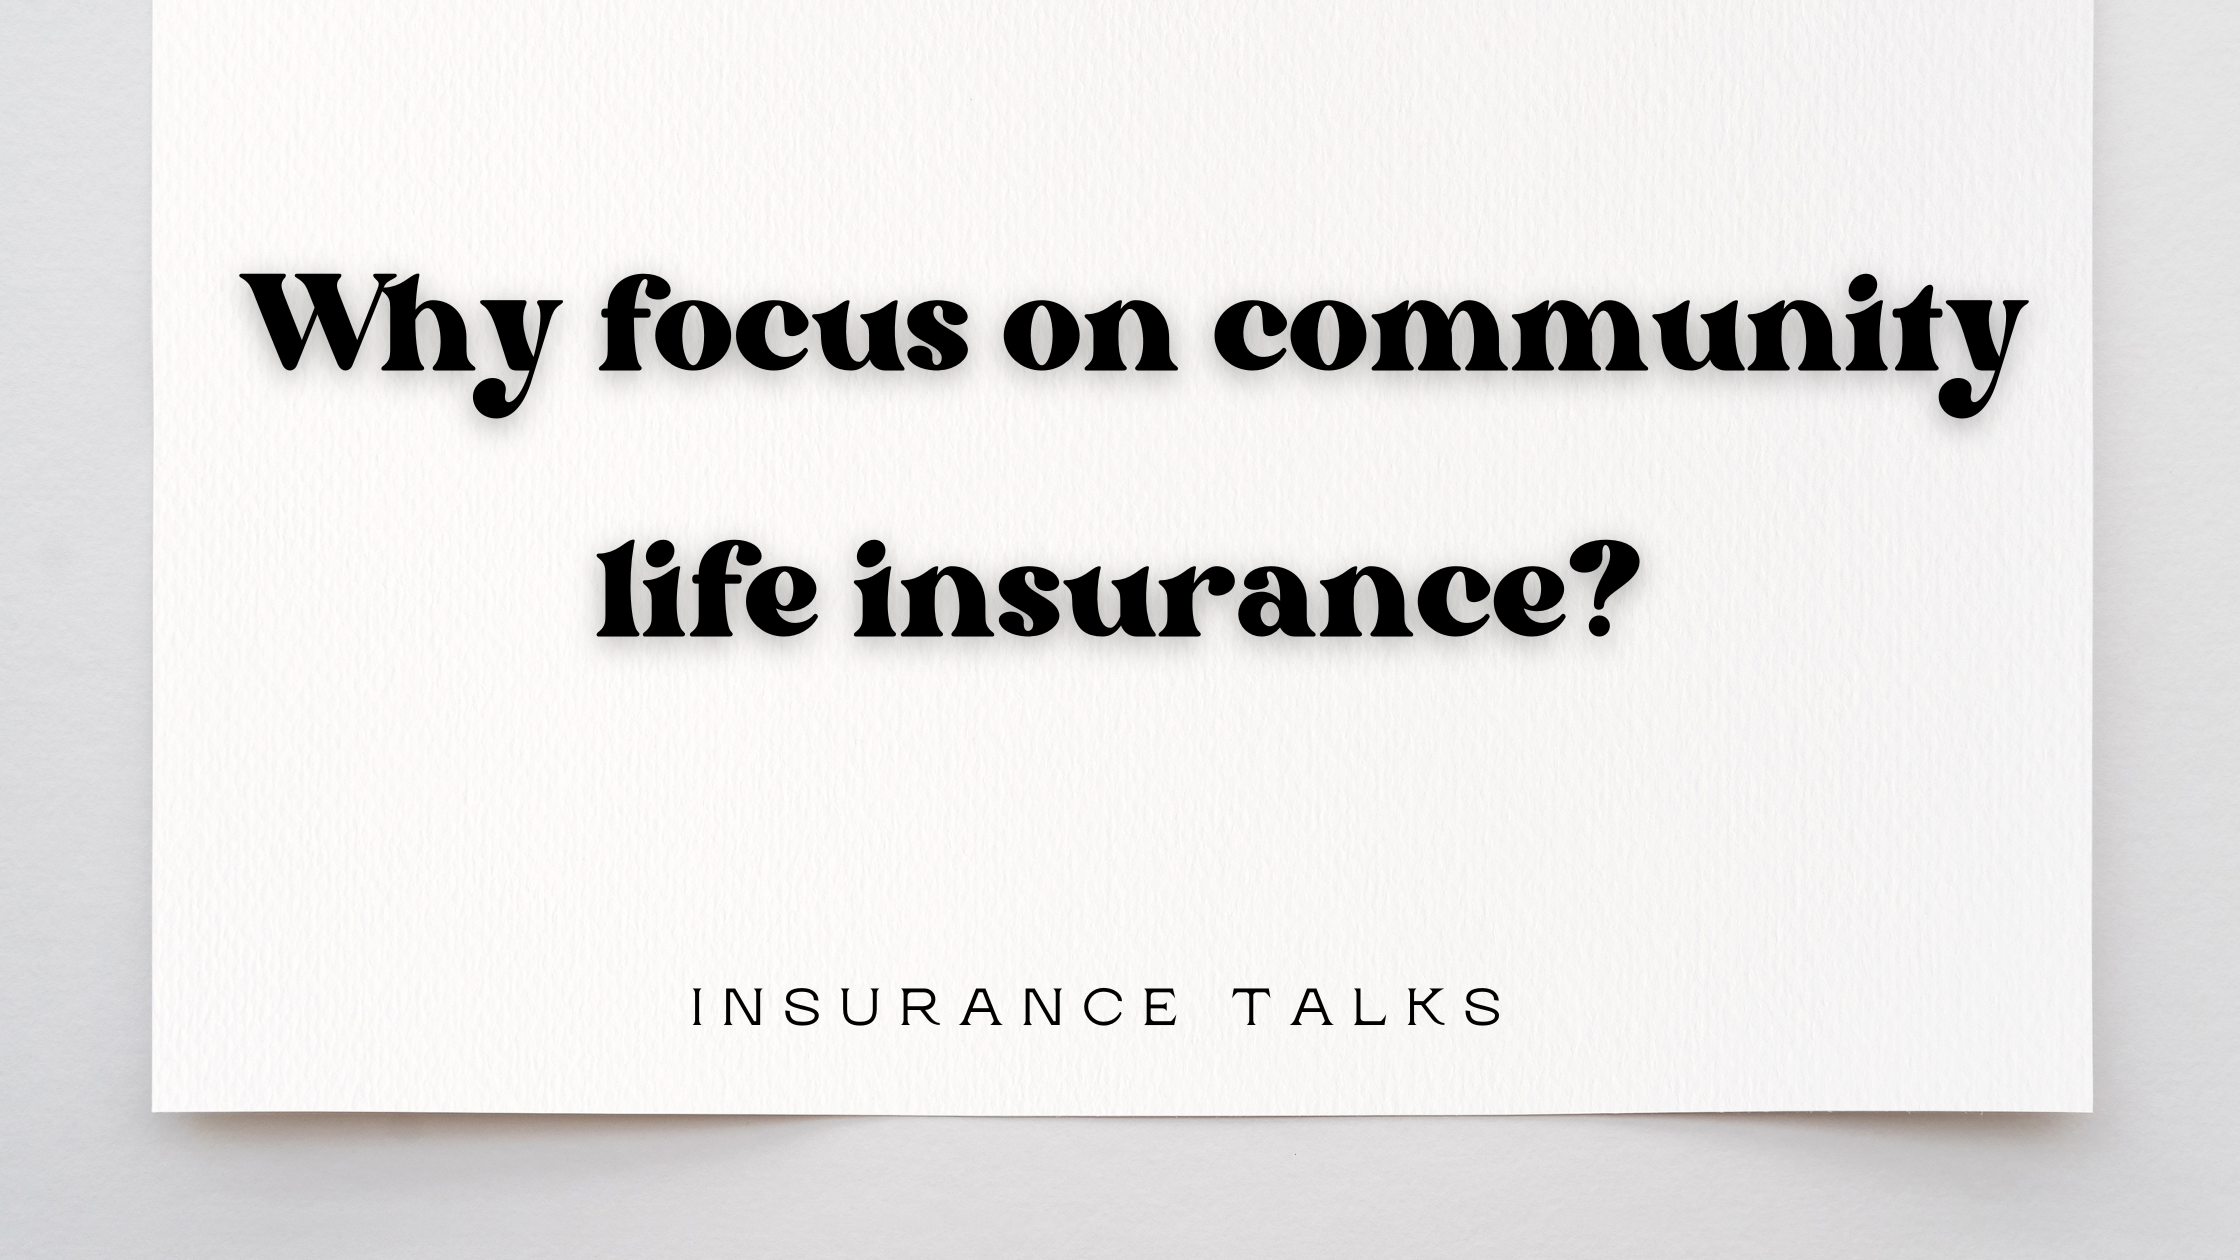 Why focus on community life insurance?